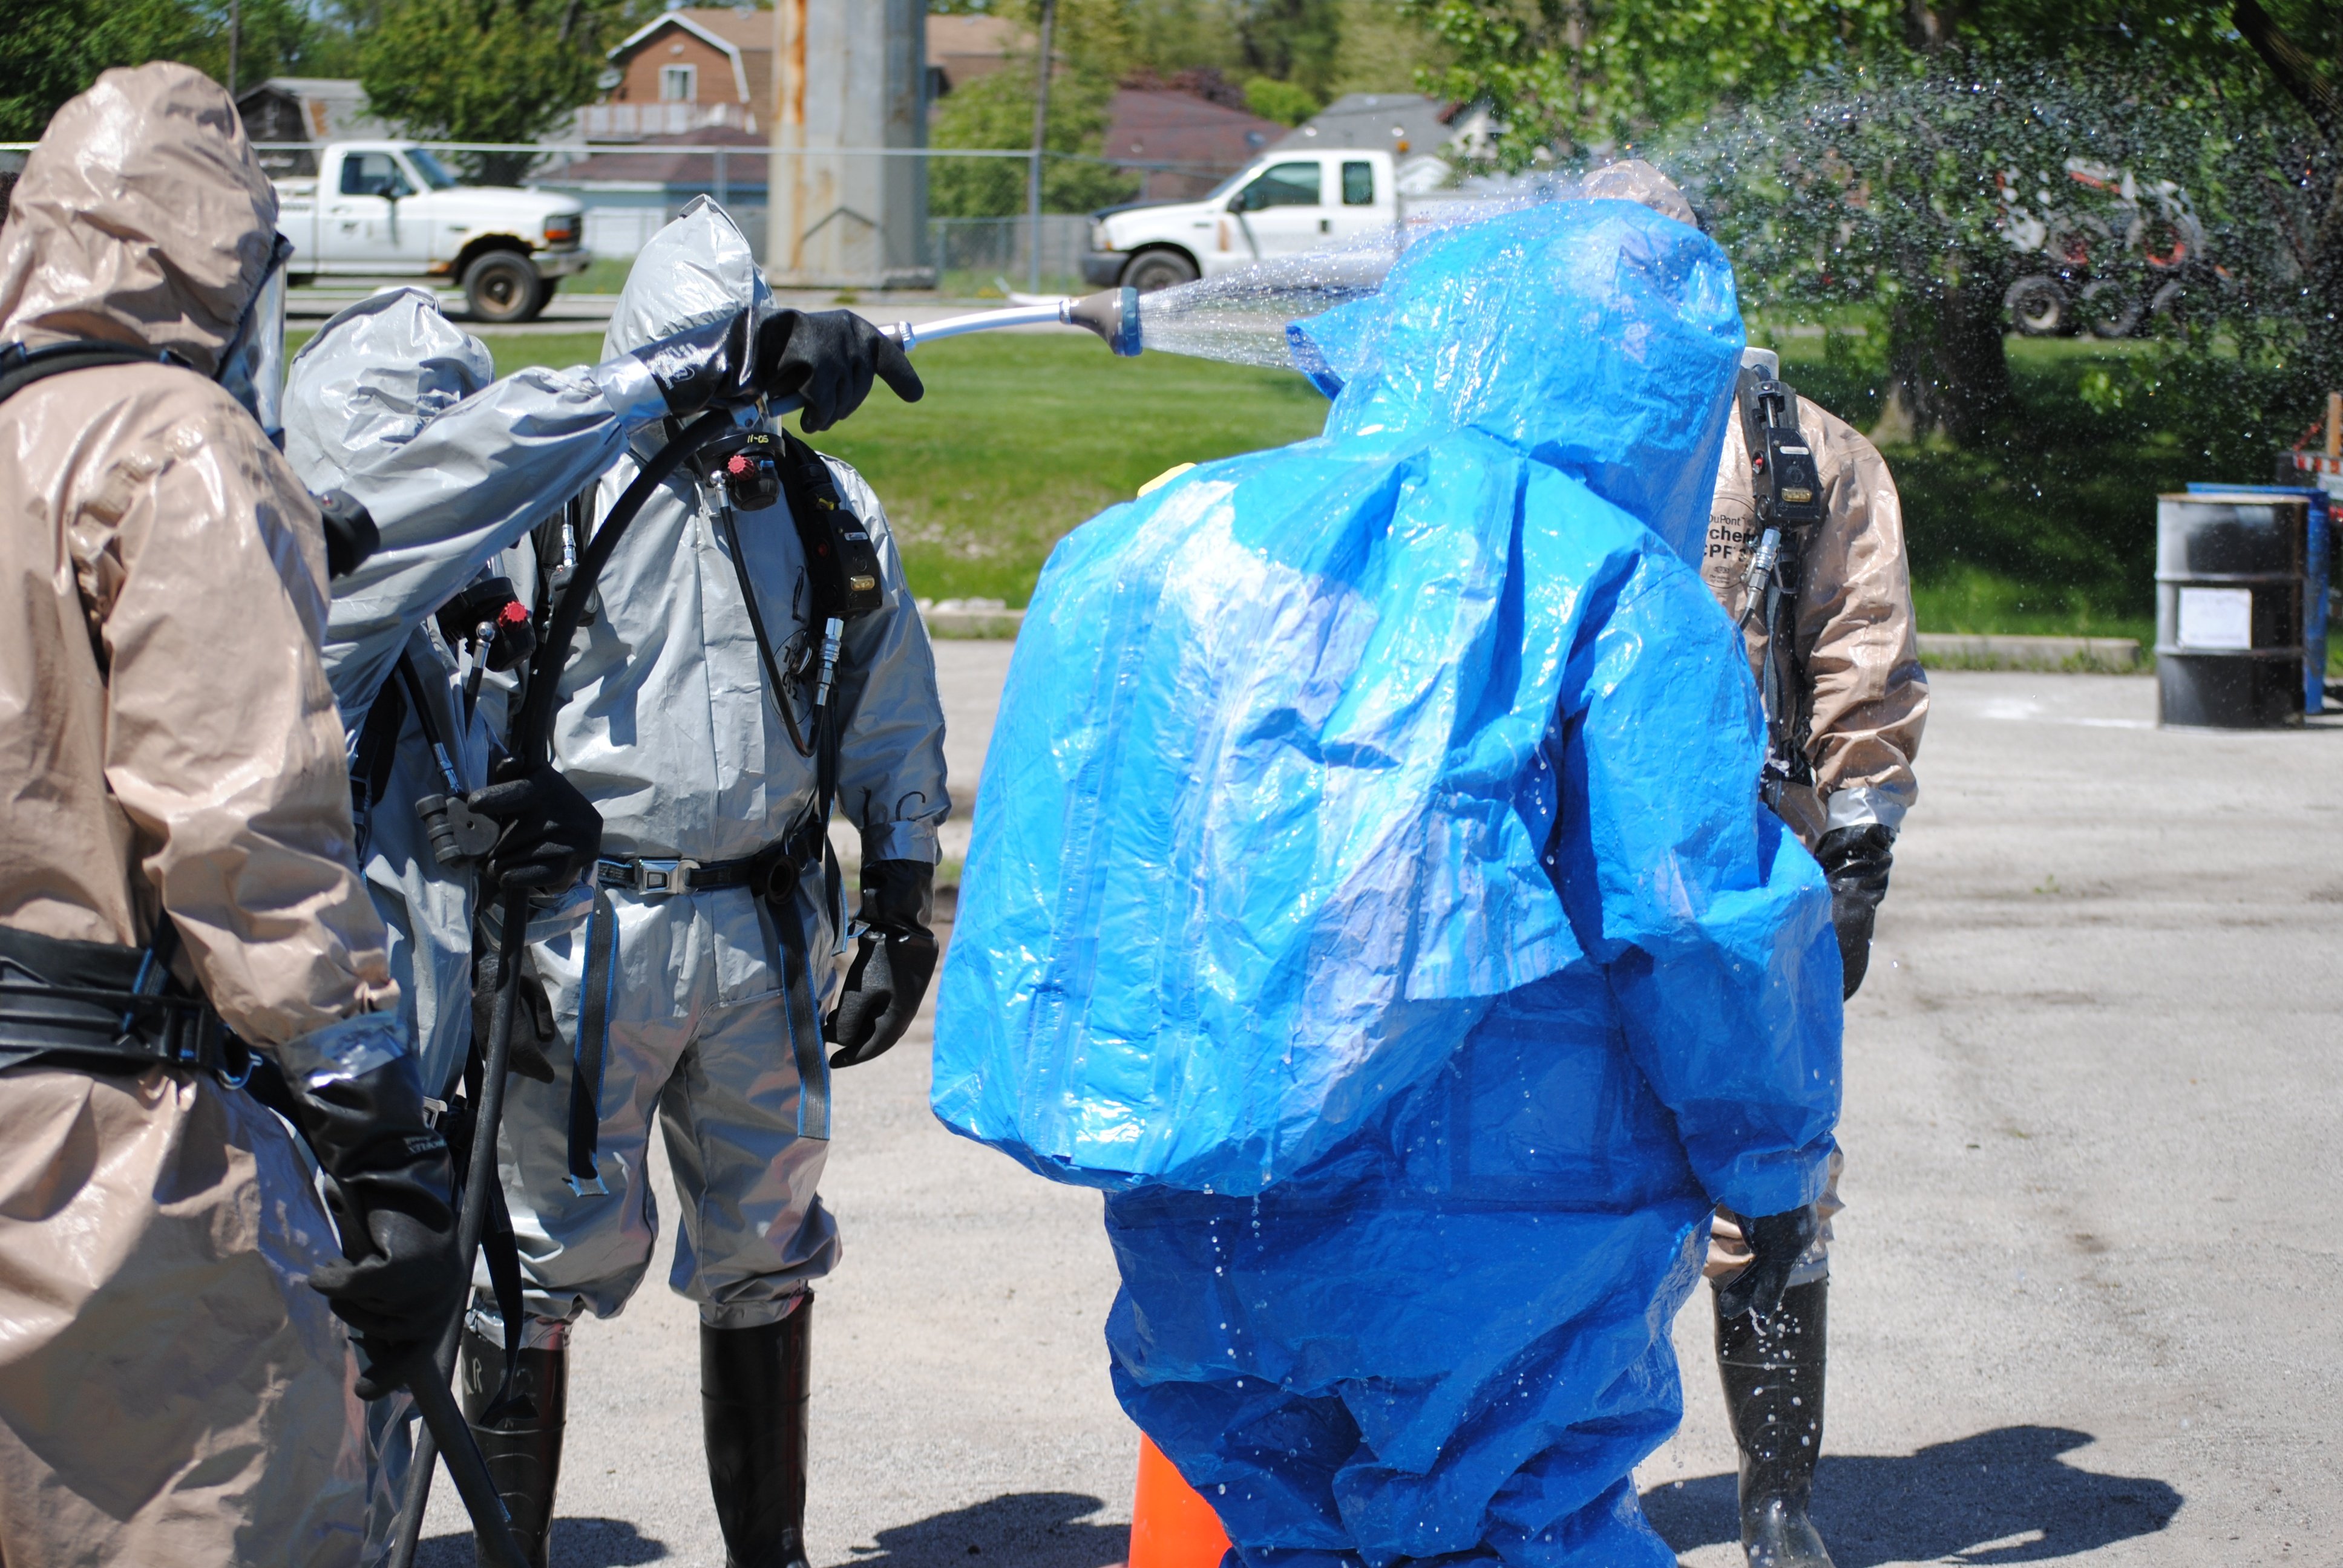 Hazwoper students learn how to properly perform decontamination during training exercises